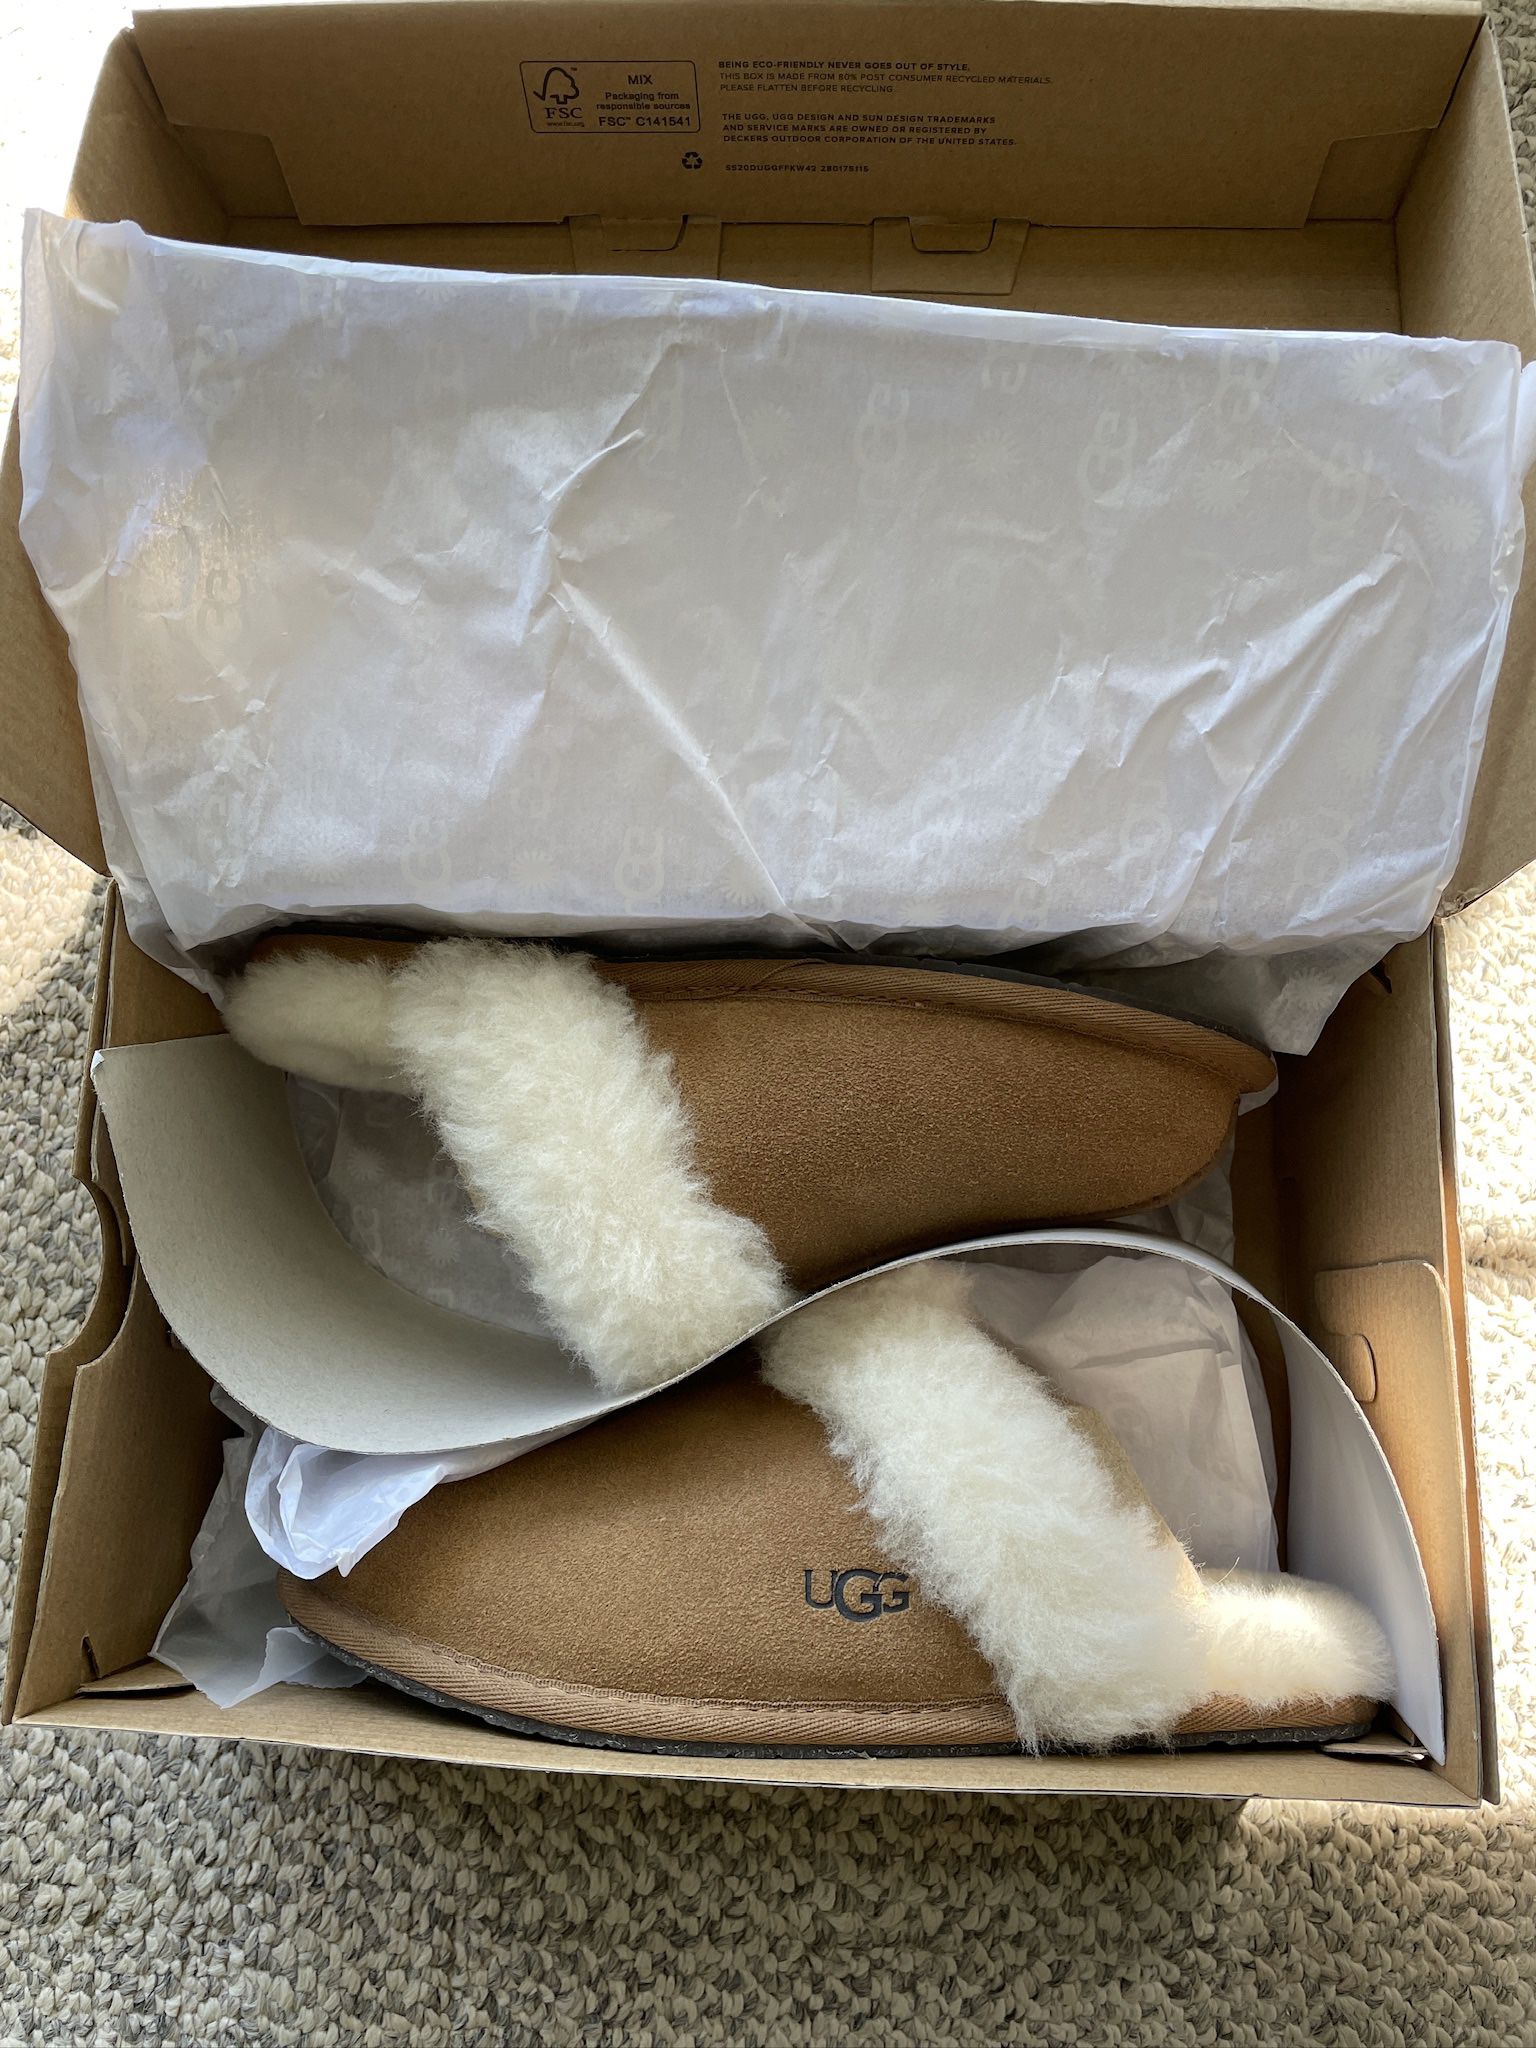 New Ugg Slippers